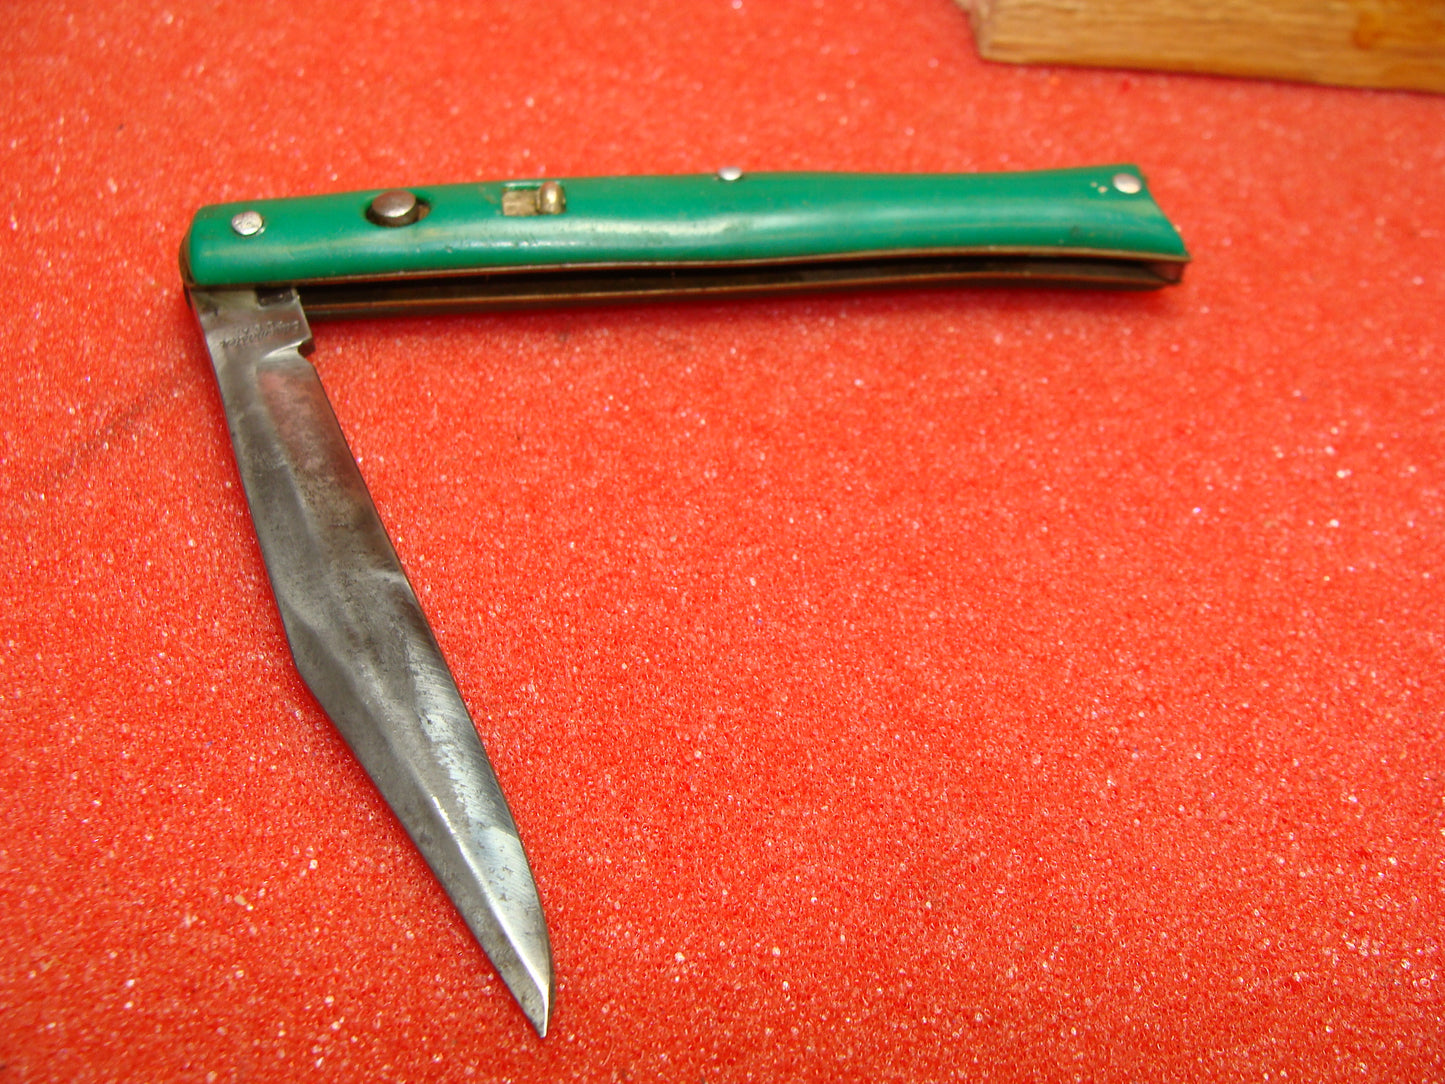 EDGEMASTER USA 1936-56 VINTAGE AMERICAN AUTOMATIC KNIFE 4" FISH TAIL SABER BLADE SHADOW BOLSTERS DARK GREEN COMPOSITION HANDLES